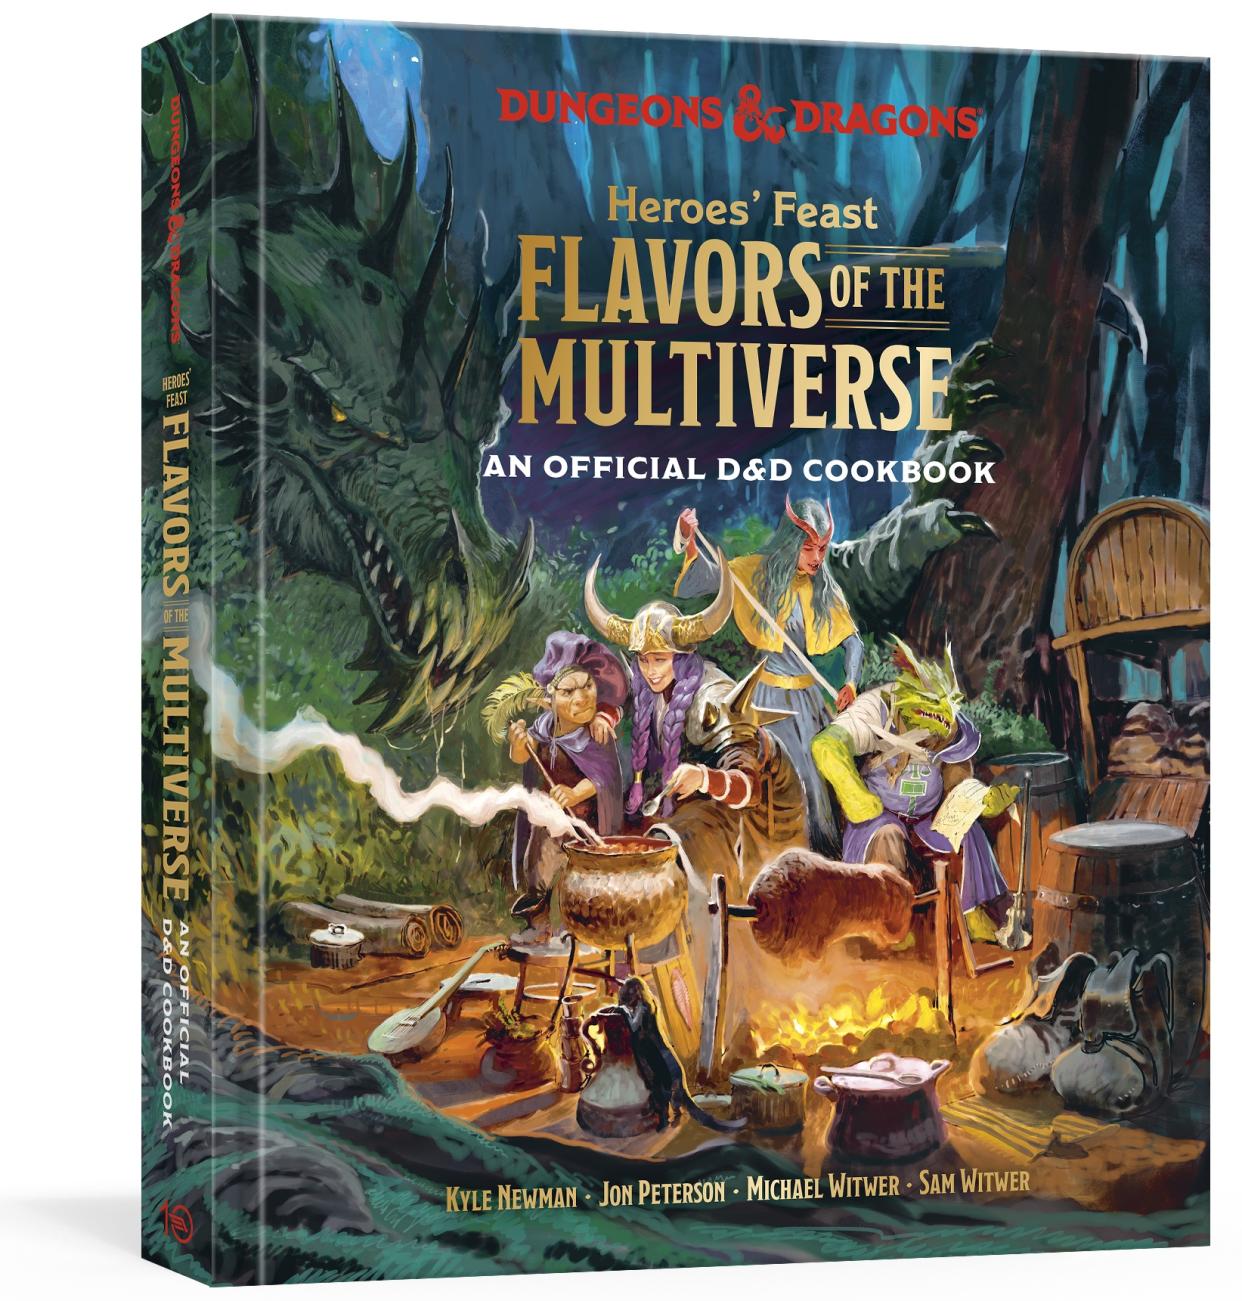 Heroes’ Feast Flavors of the Multiverse, by Kyle Newman, Jon Peterson, Michael Witwer, and Sam Witwer, (Wizards of the Coast LLC)